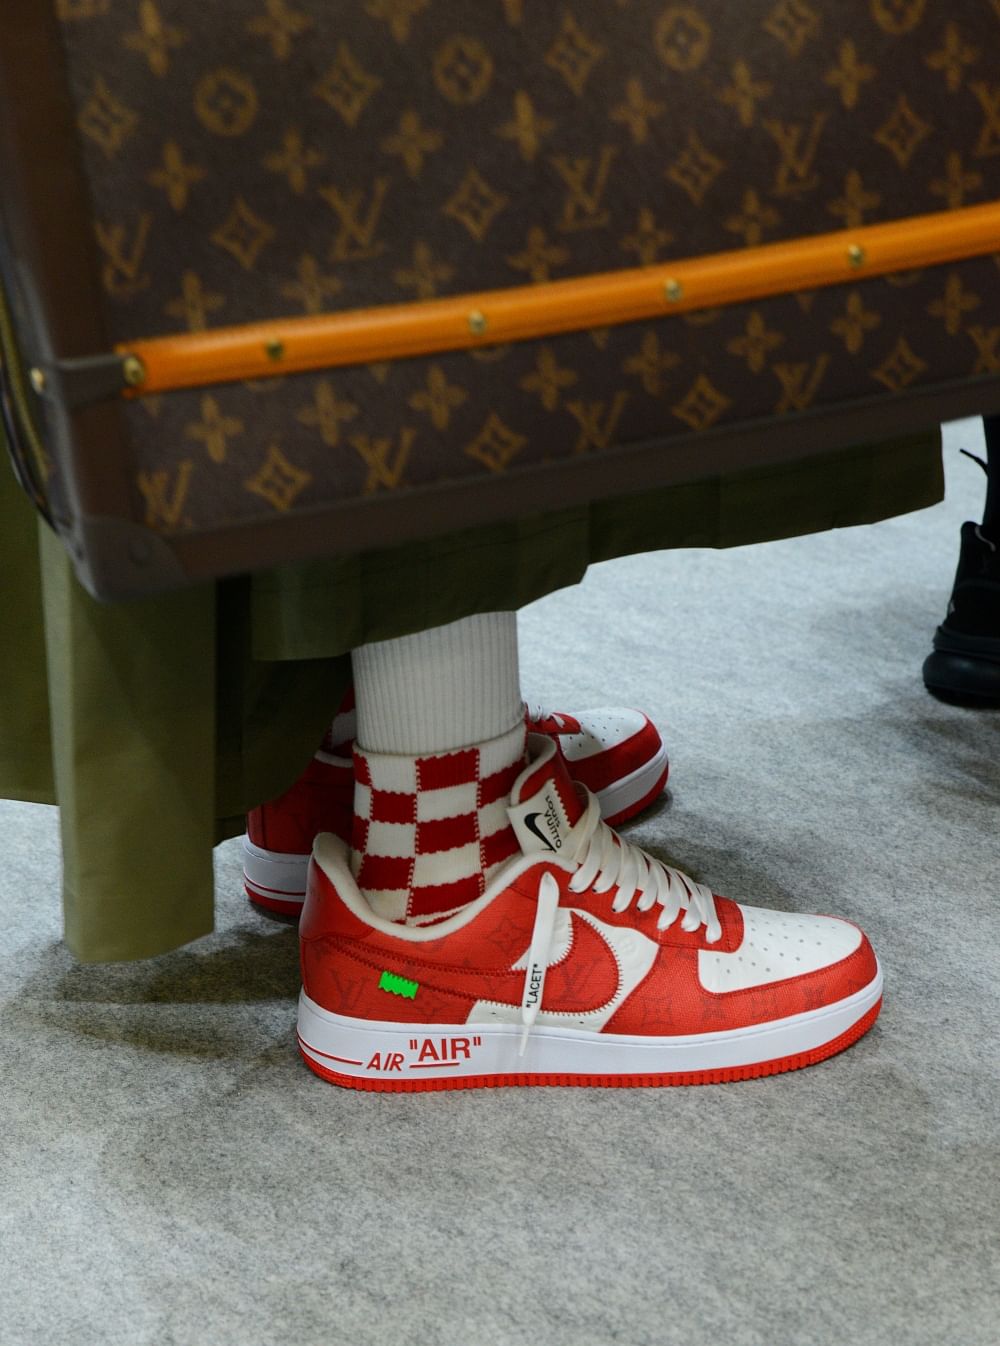 Sotheby's to Auction Virgil Abloh Sneaker Prototype for Louis